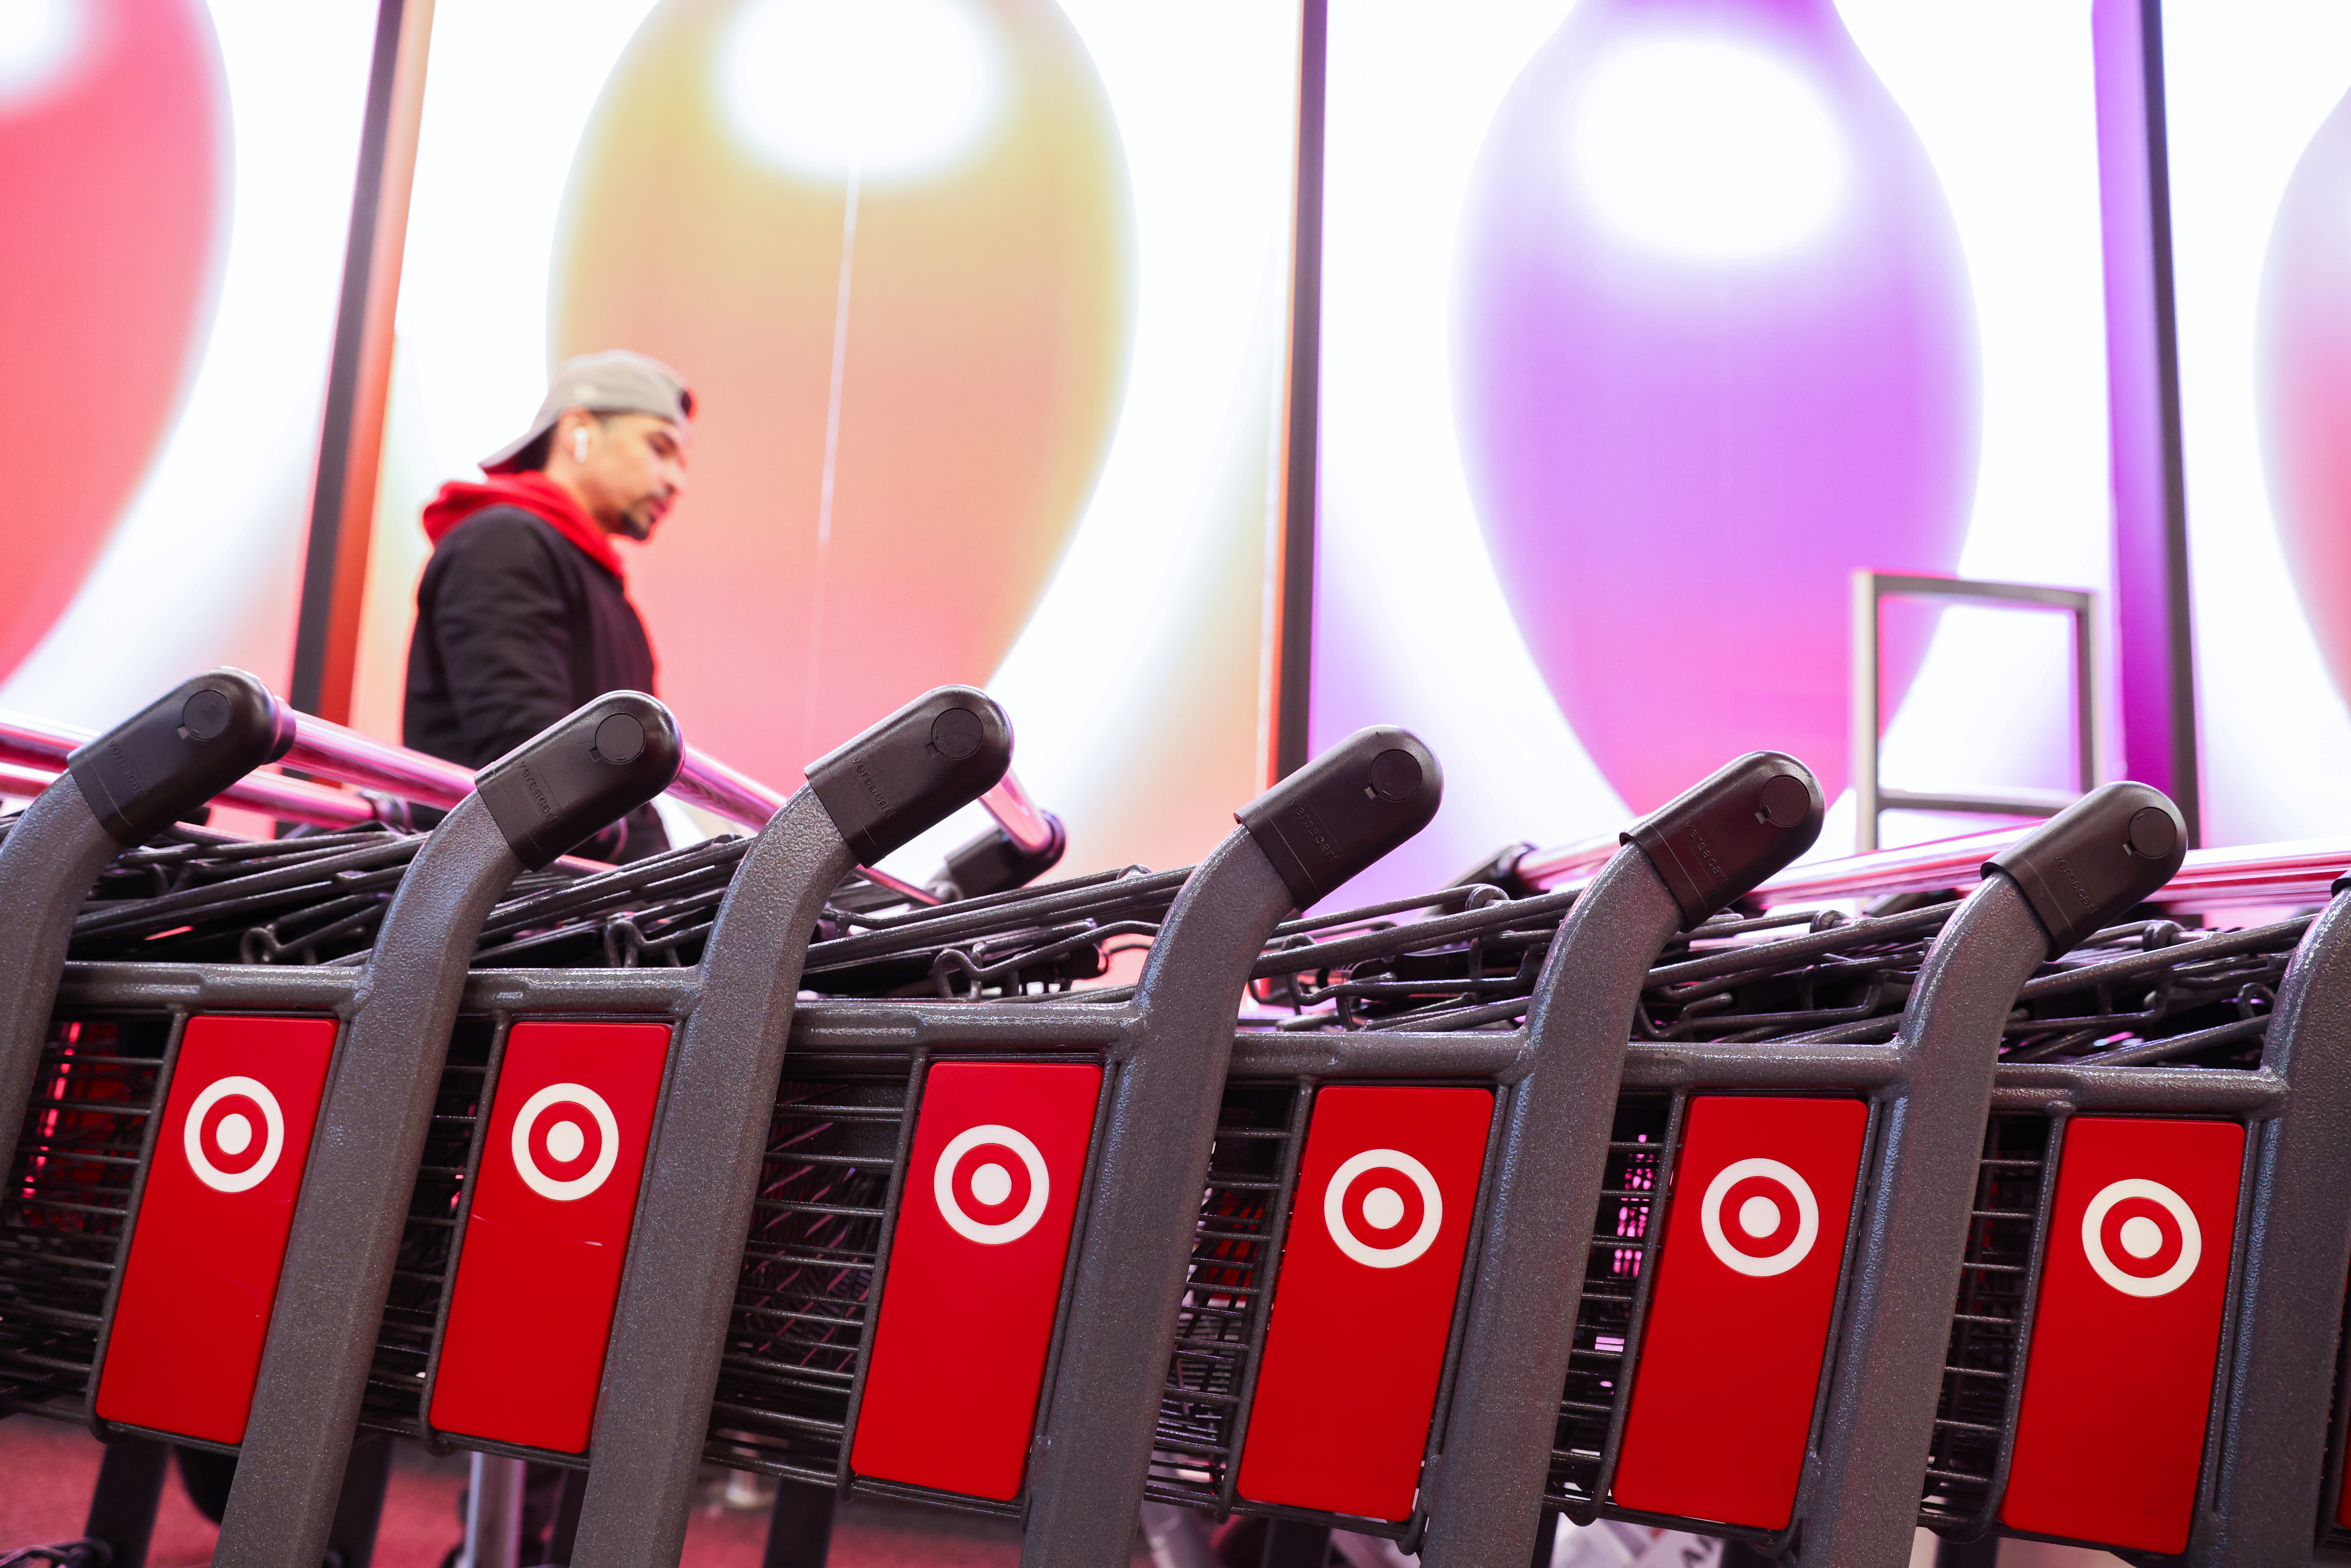 A Target logo is seen on shopping carts at a Target store in Manhattan, New York City